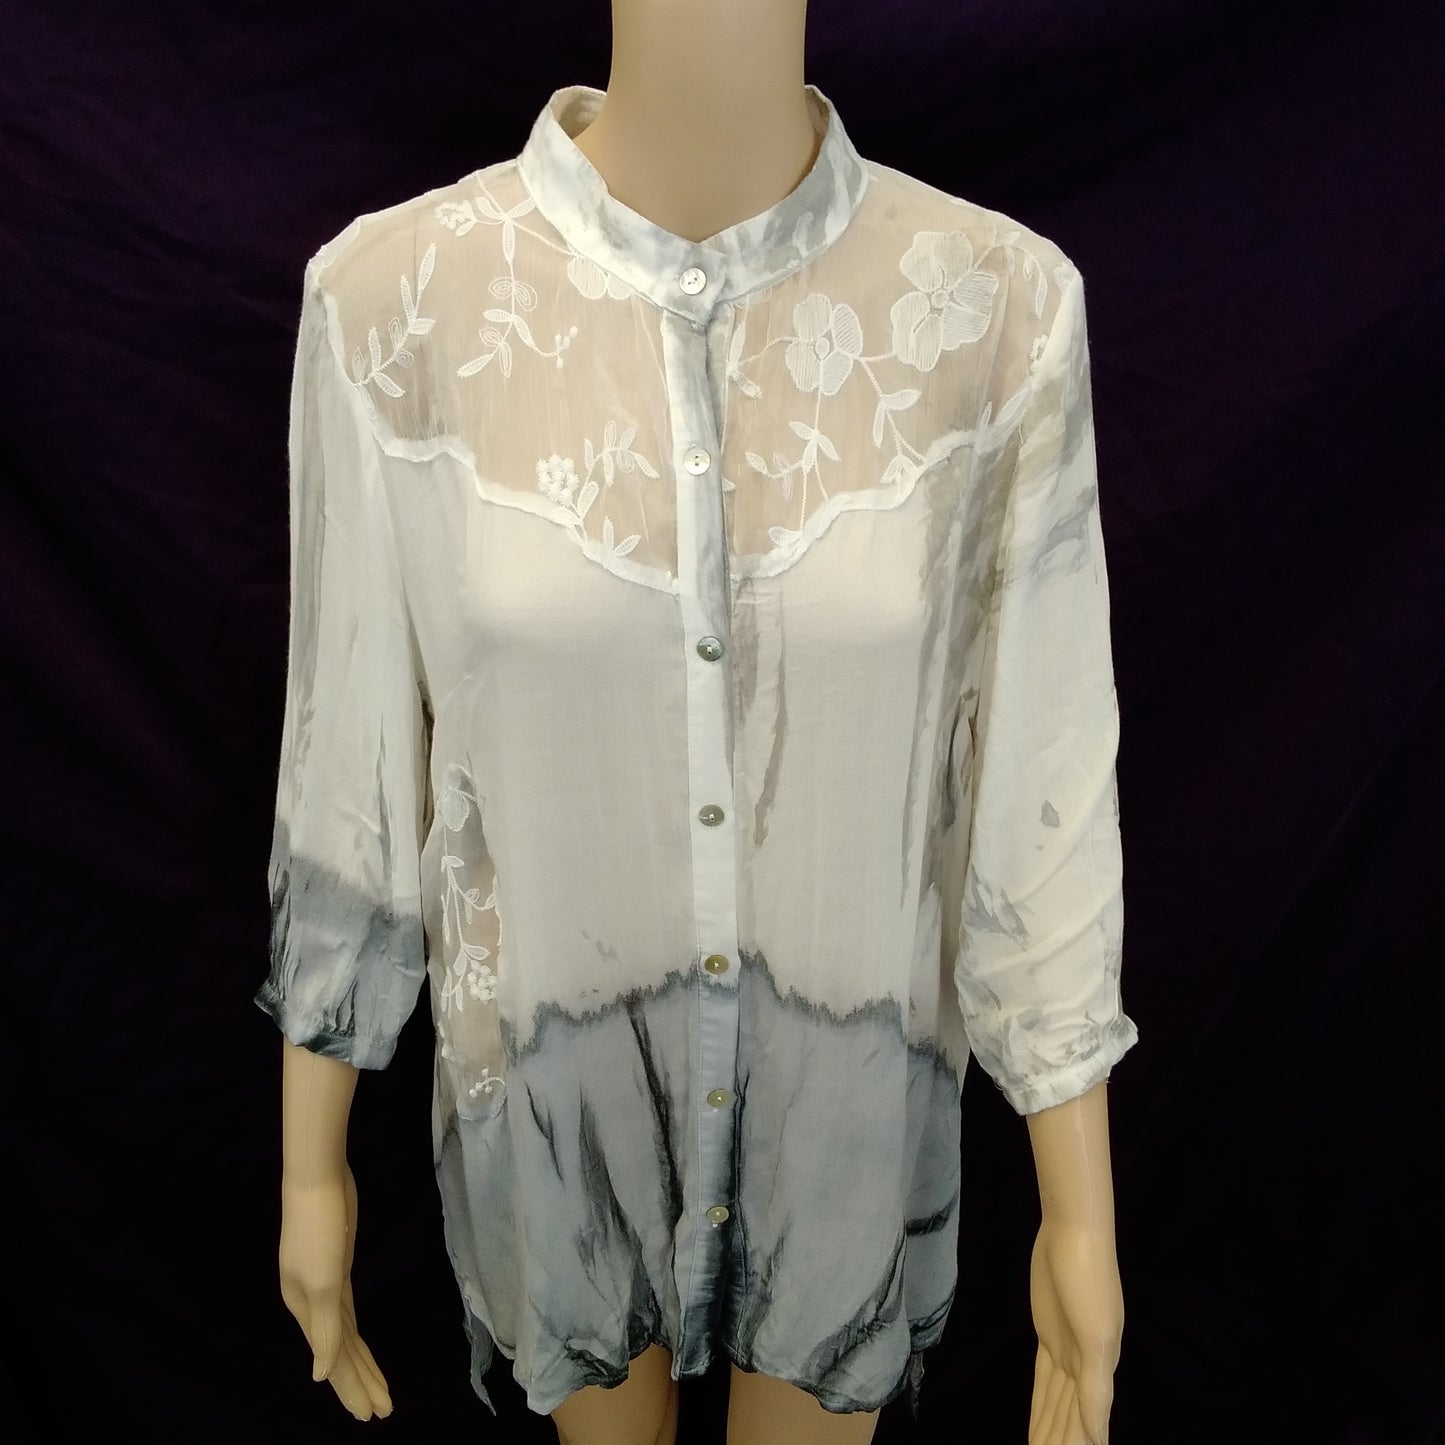 NWT - Belle France Women's White and Gray 3/4 Sleeve Blouse - Size: L